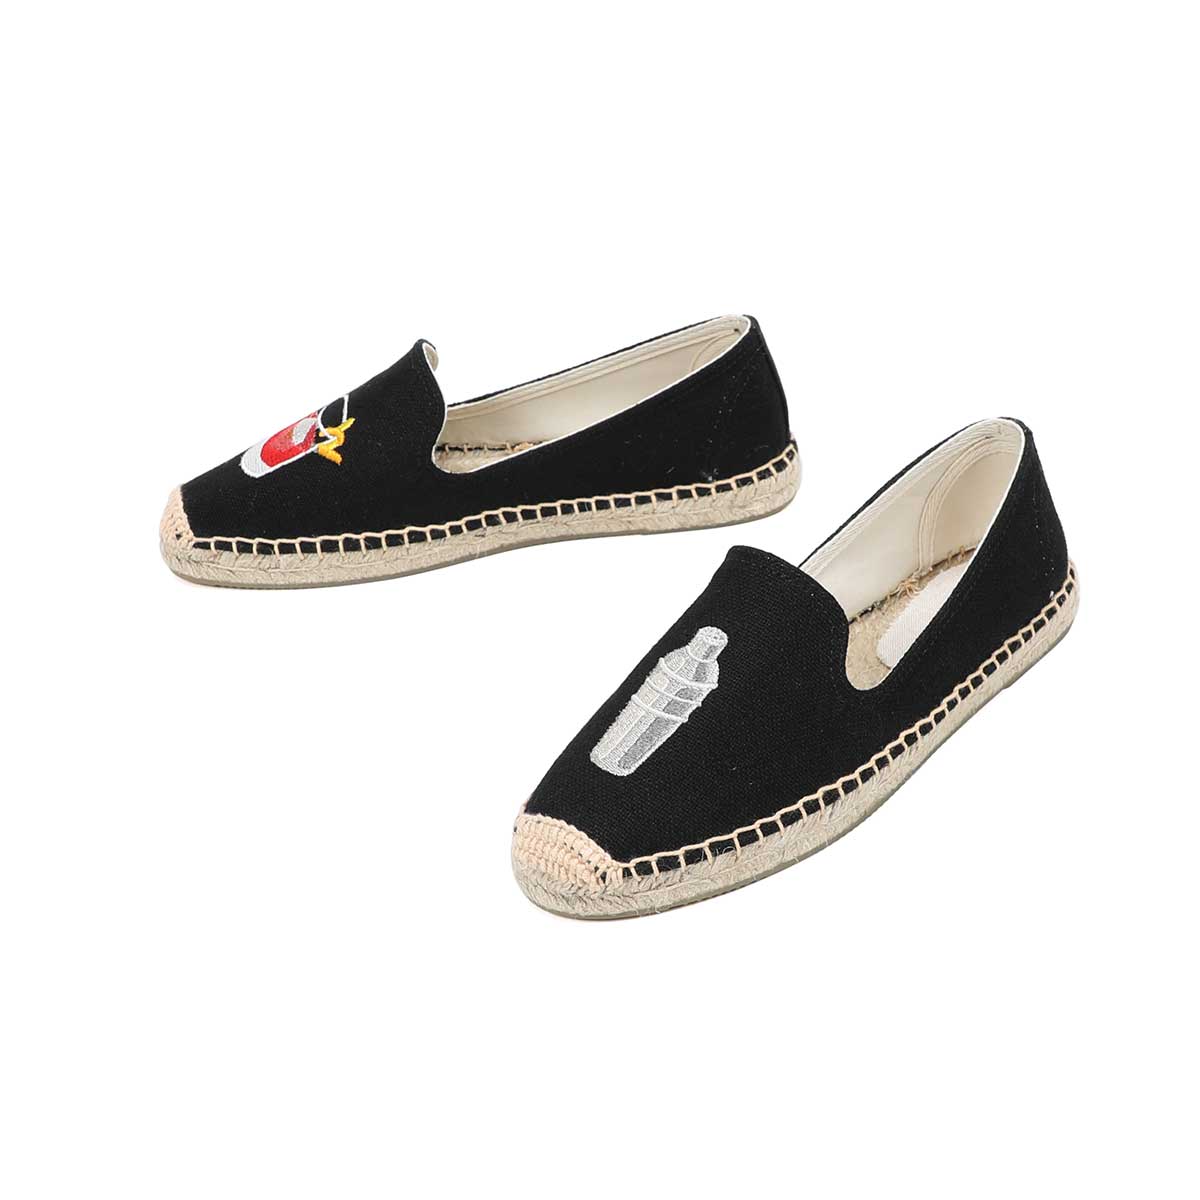 2022 new comfortable all-match flat ladies fisherman shoes round toe shallow mouth slip-on canvas shoes casual mules